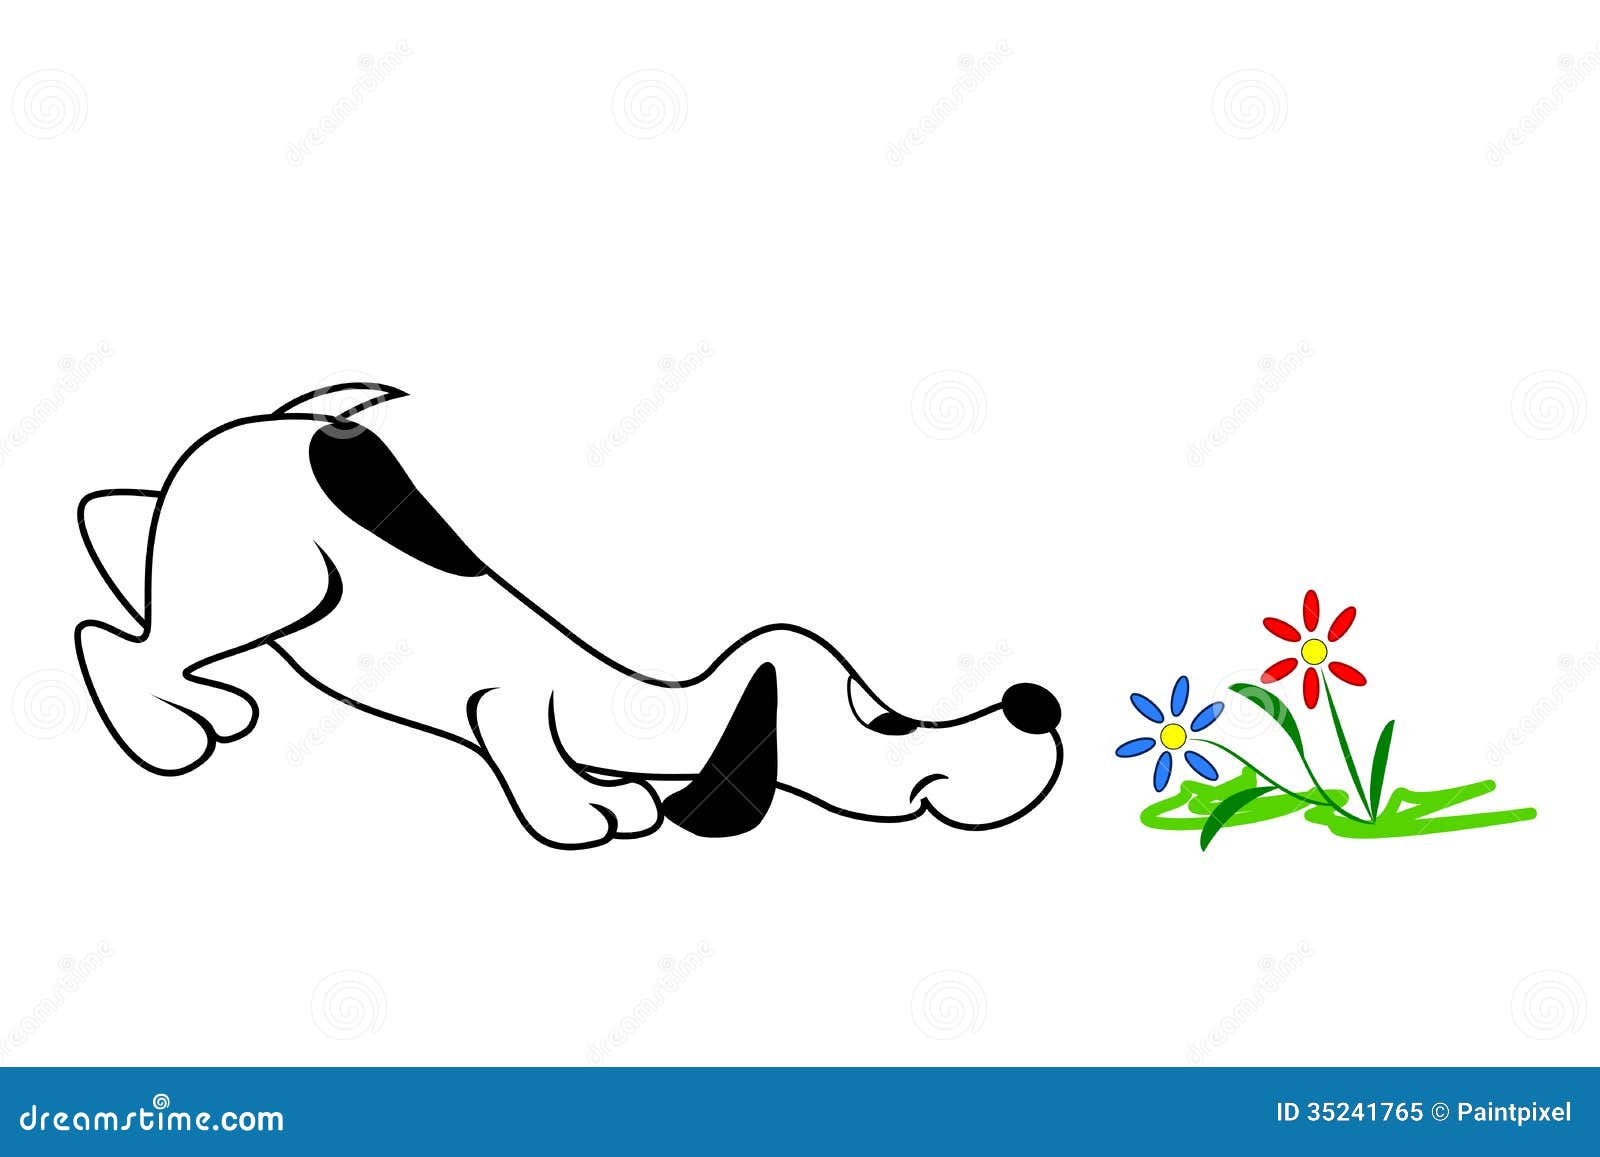 dog sniffing clipart - photo #18